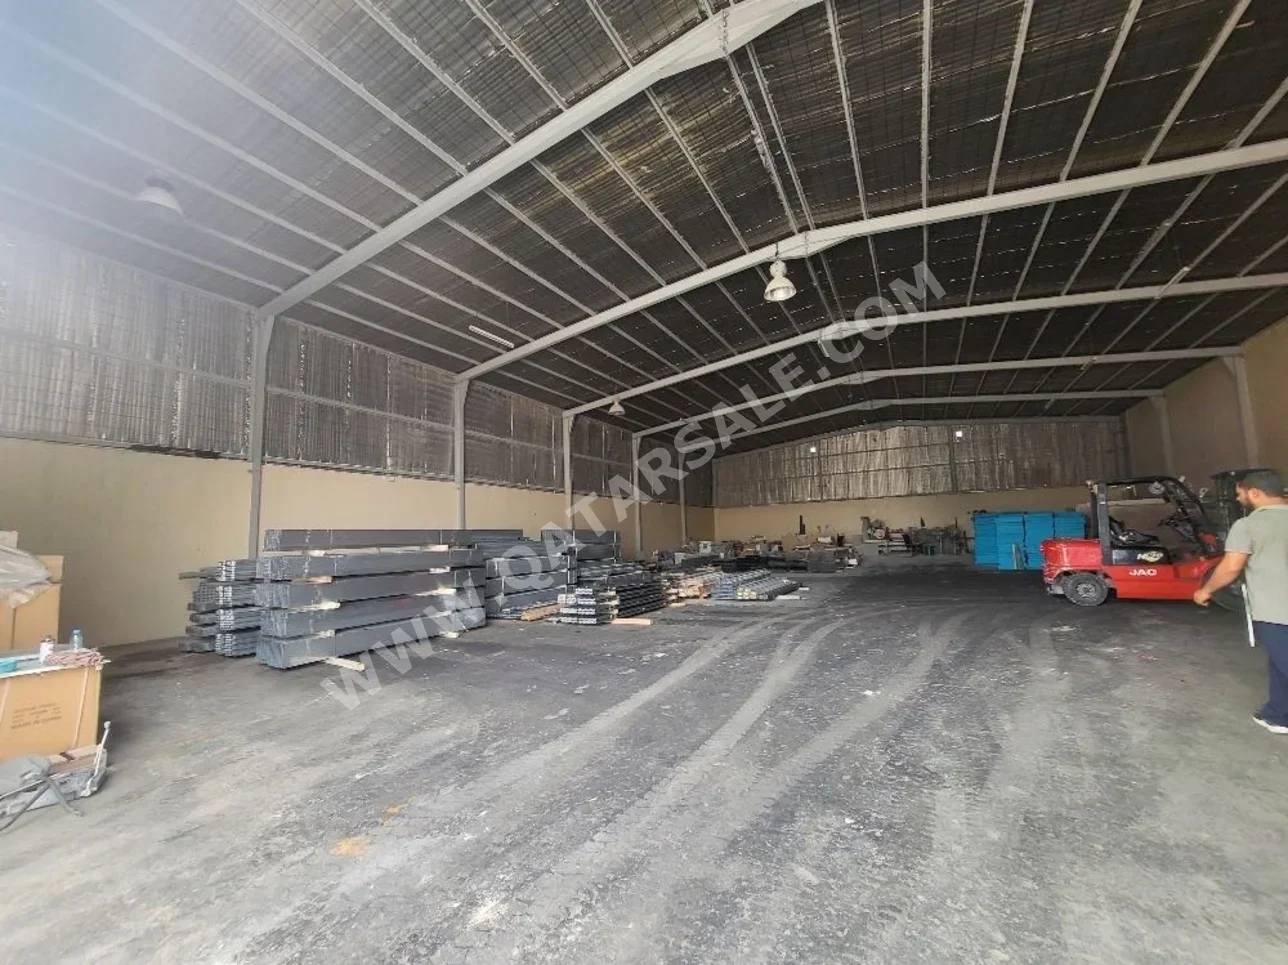 Warehouses & Stores Doha  Industrial Area Area Size: 500 Square Meter